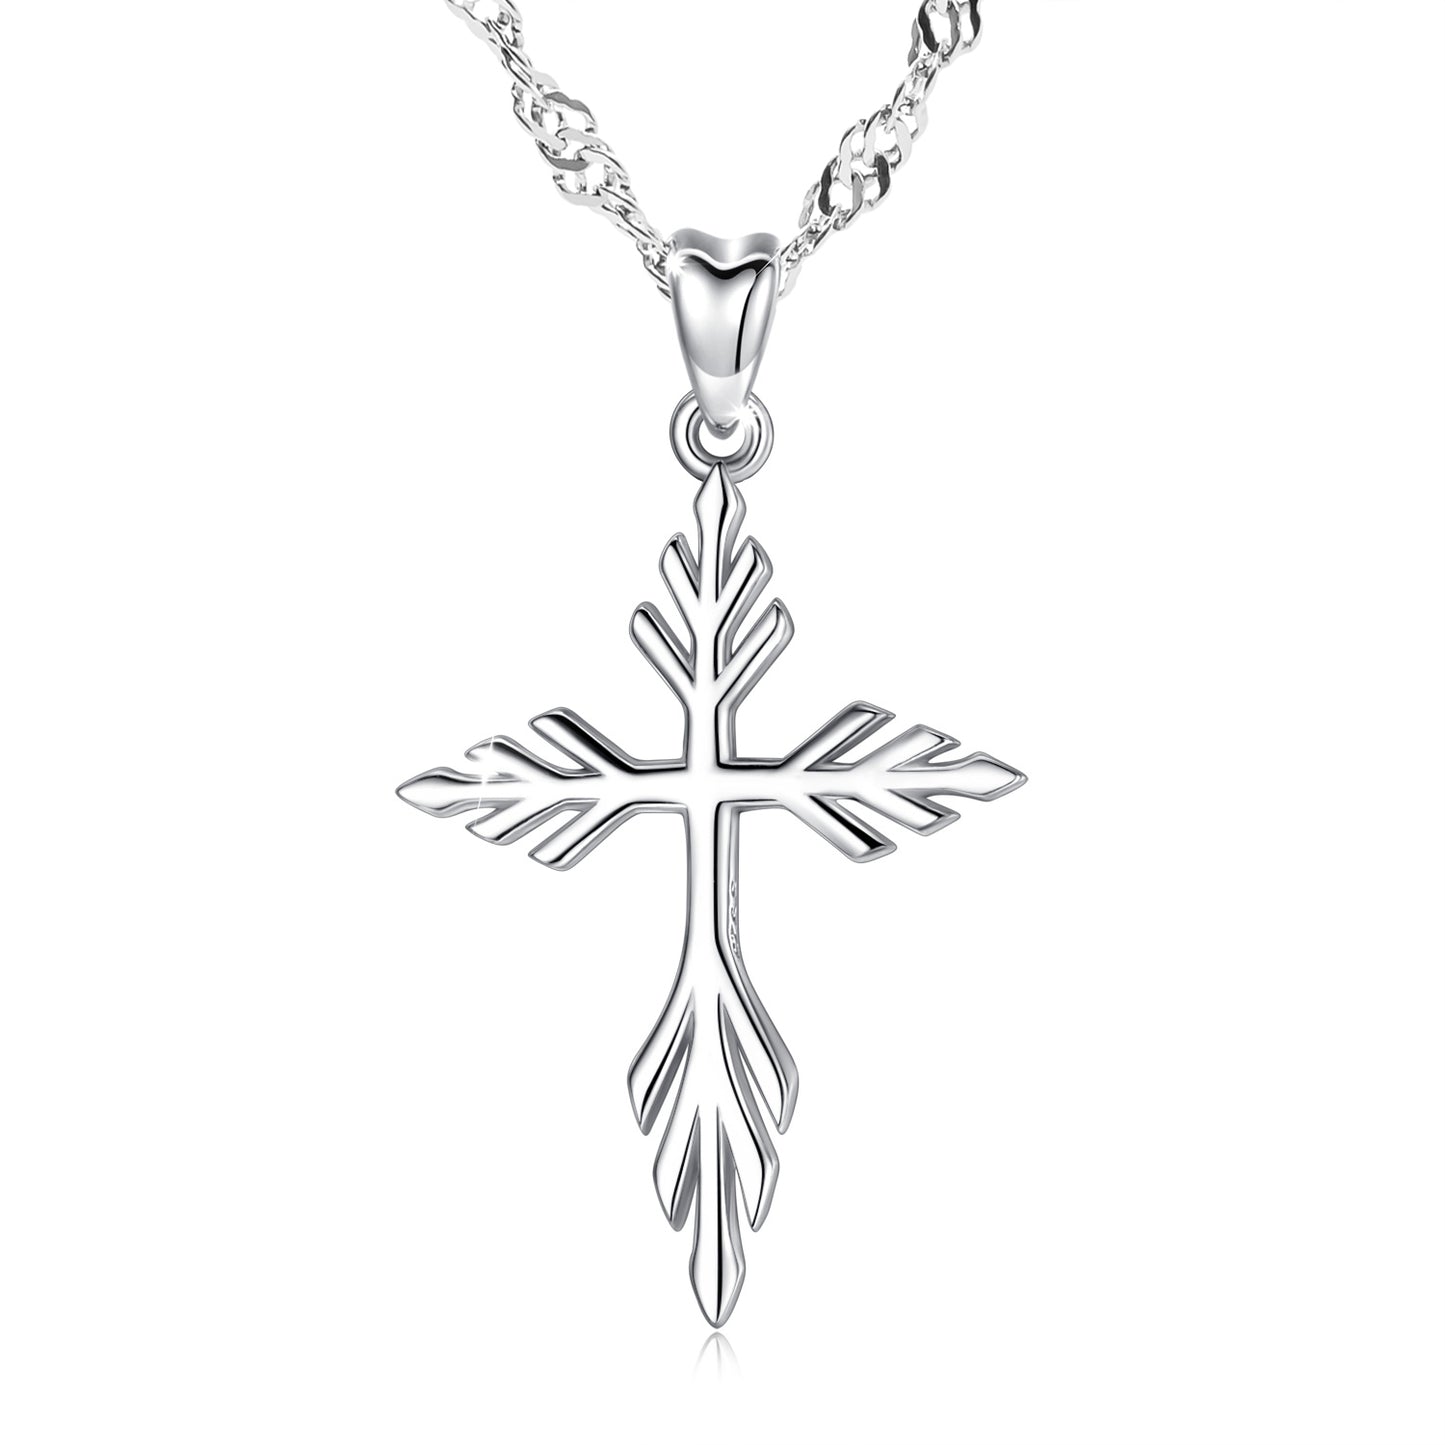 Angel Cross pendant with 925 Sterling Silver Water Wave necklace chain 18"